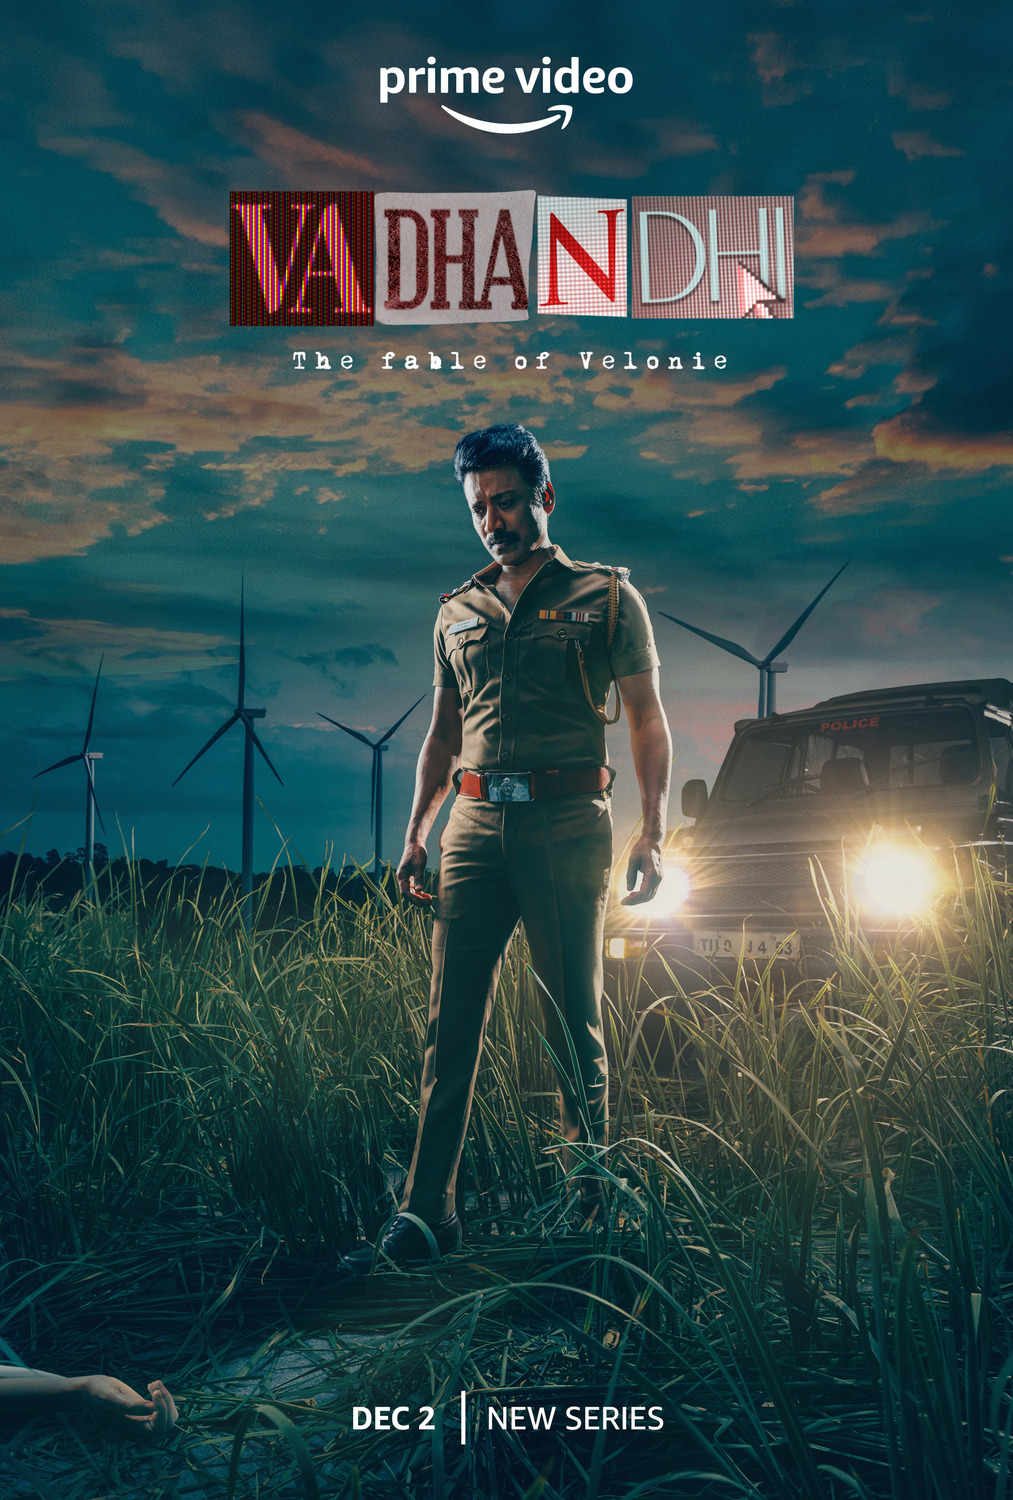 Extra Large TV Poster Image for Vadhandhi: The Fable of Velonie (#1 of 3)